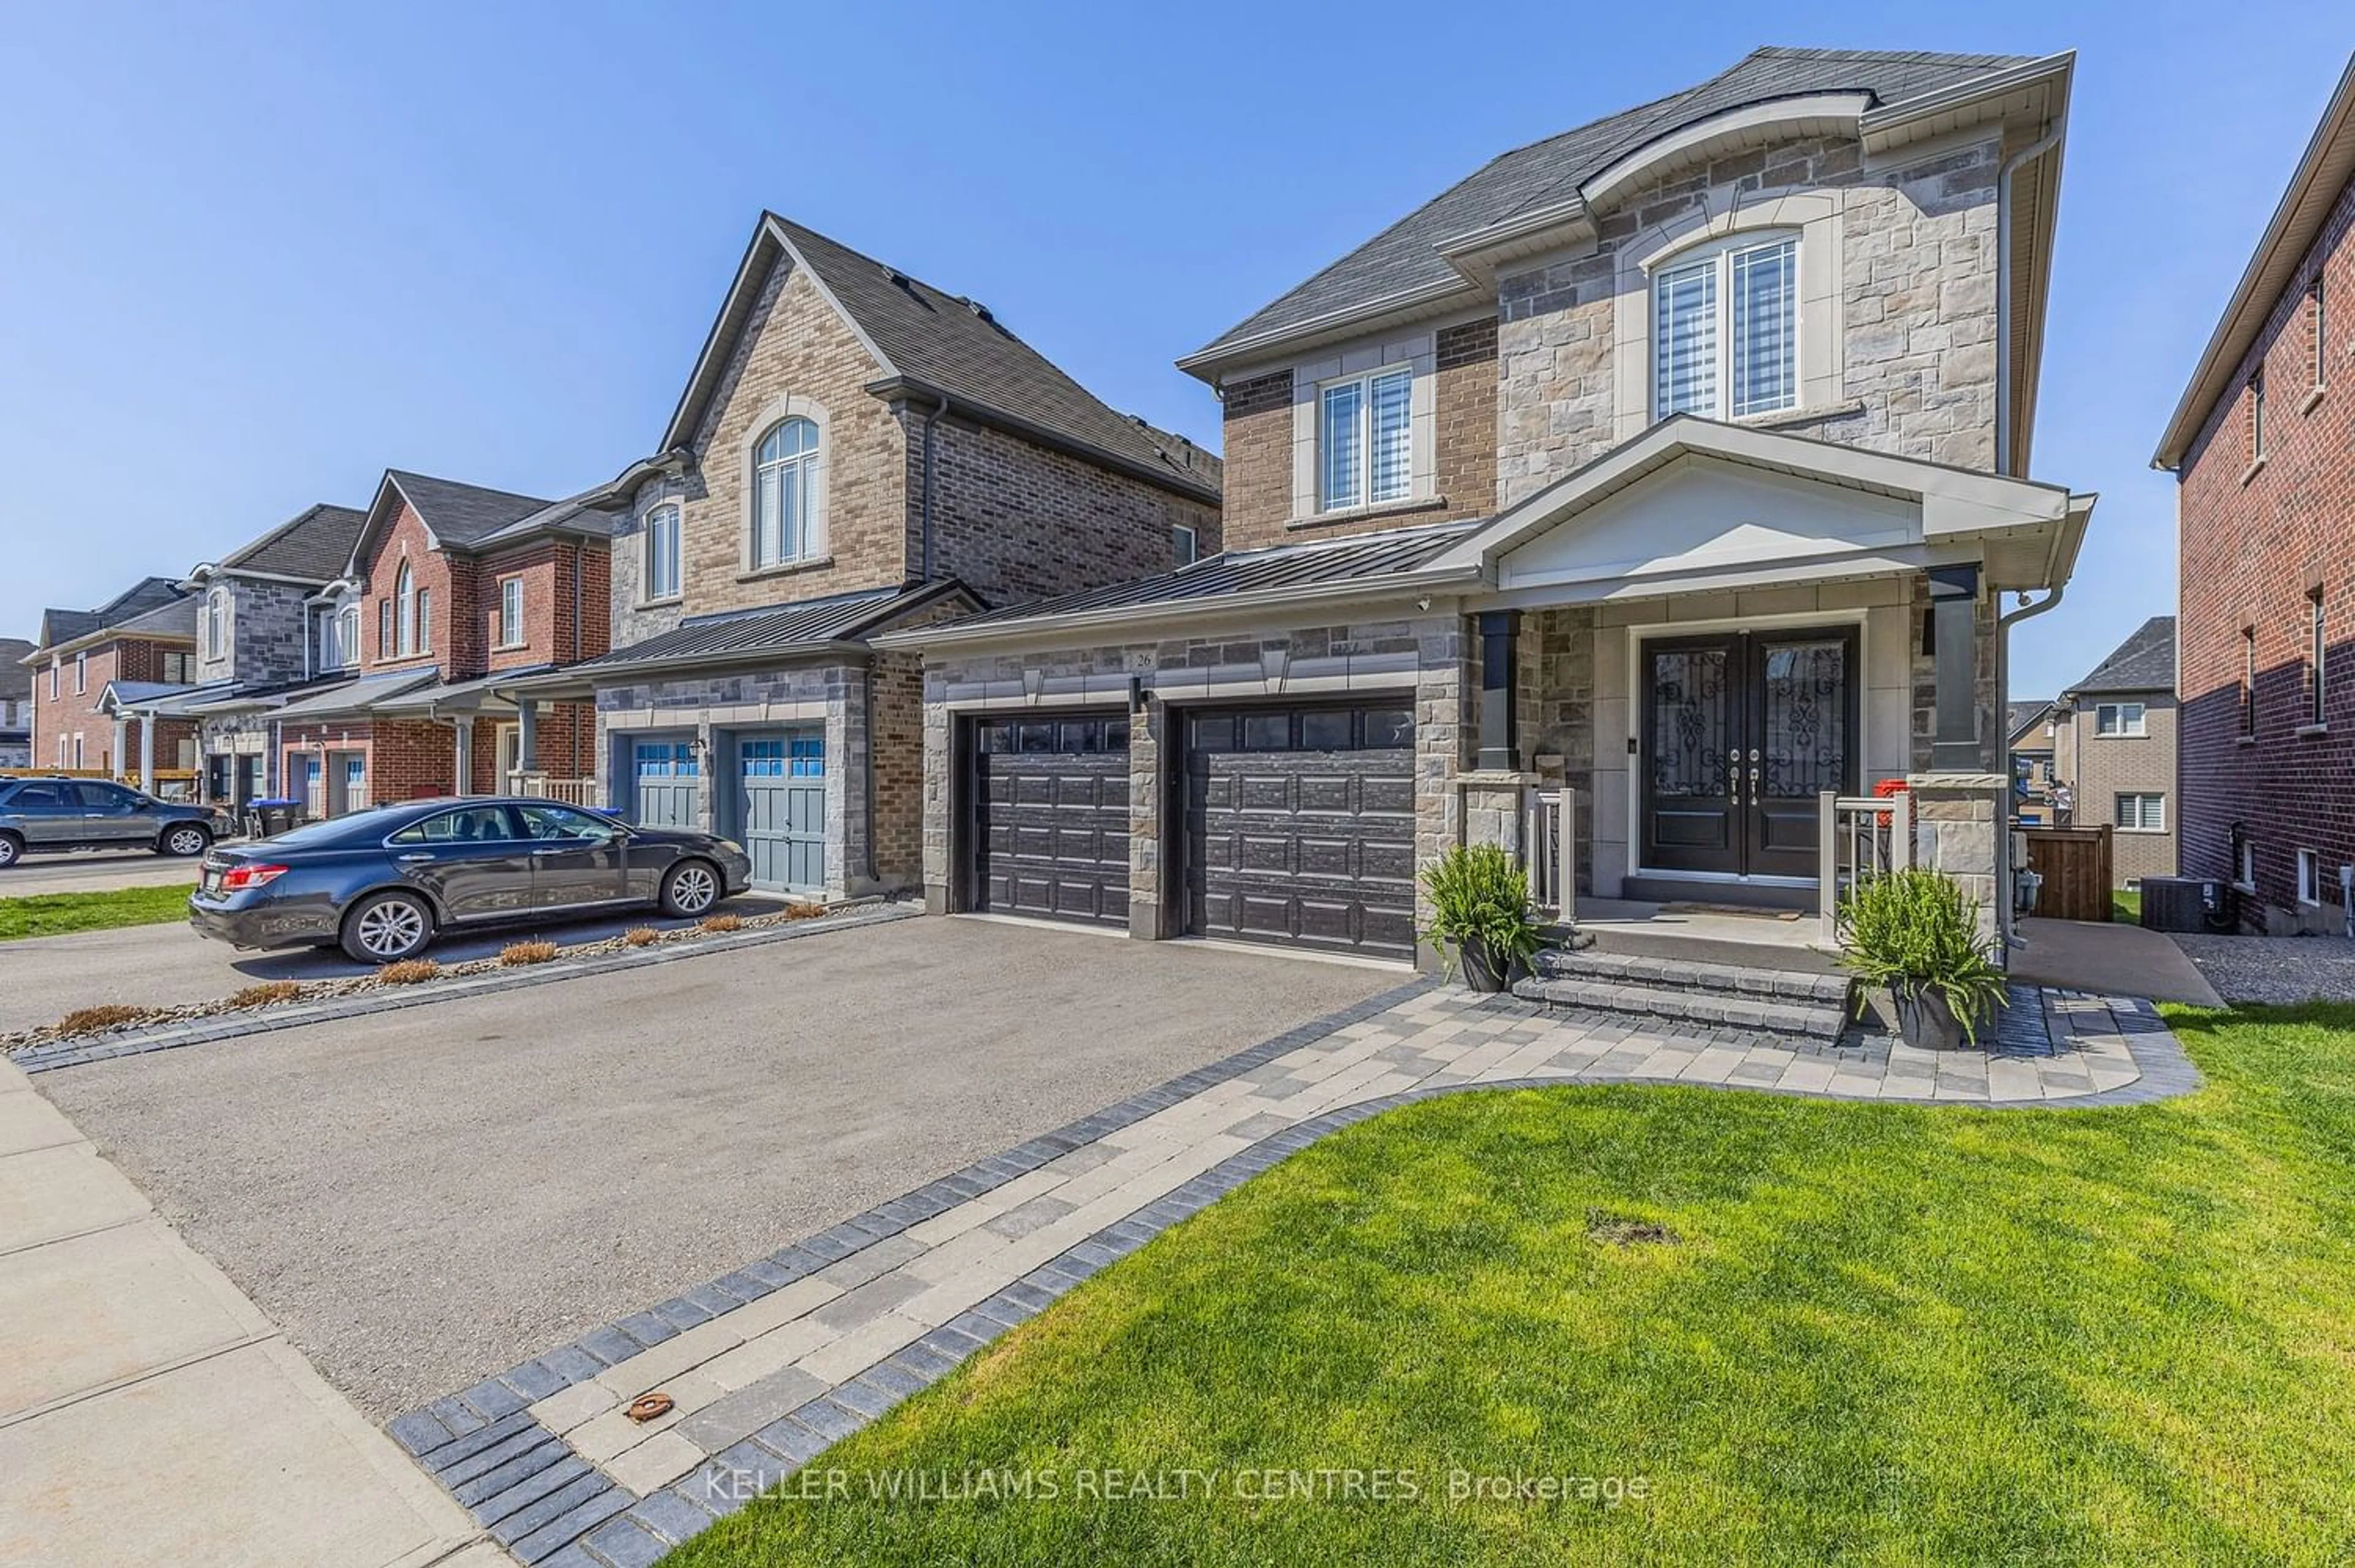 Home with brick exterior material for 26 Tyndall Dr, Bradford West Gwillimbury Ontario L3Z 4G6